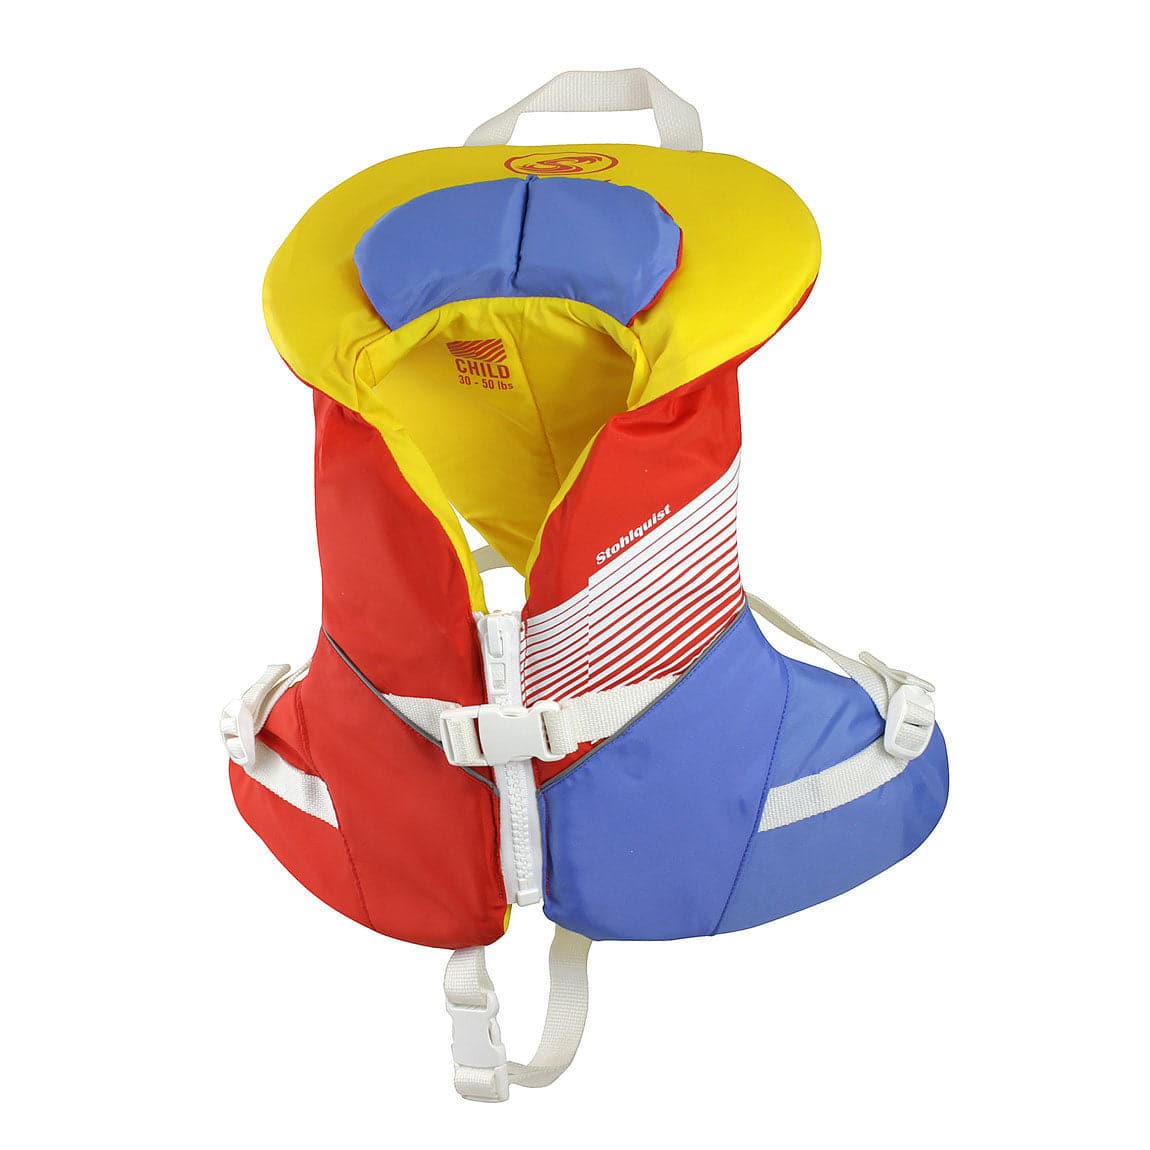 Featuring the Infant & Child PFDs kid's pfd manufactured by Stohlquist shown here from a fifth angle.